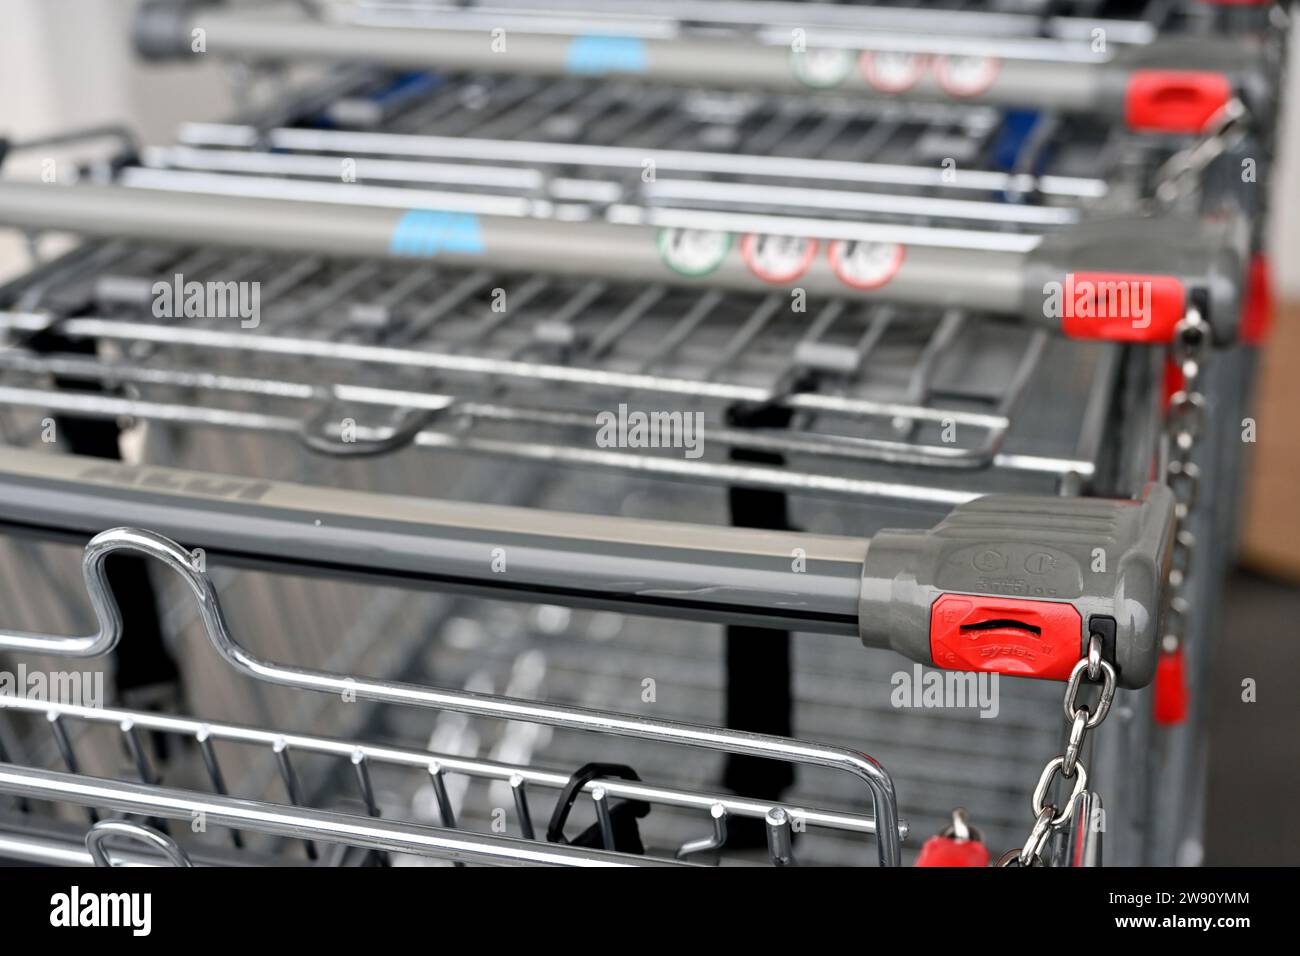 Shopping trolleys with locking coin slot to encourage return of trolley Stock Photo